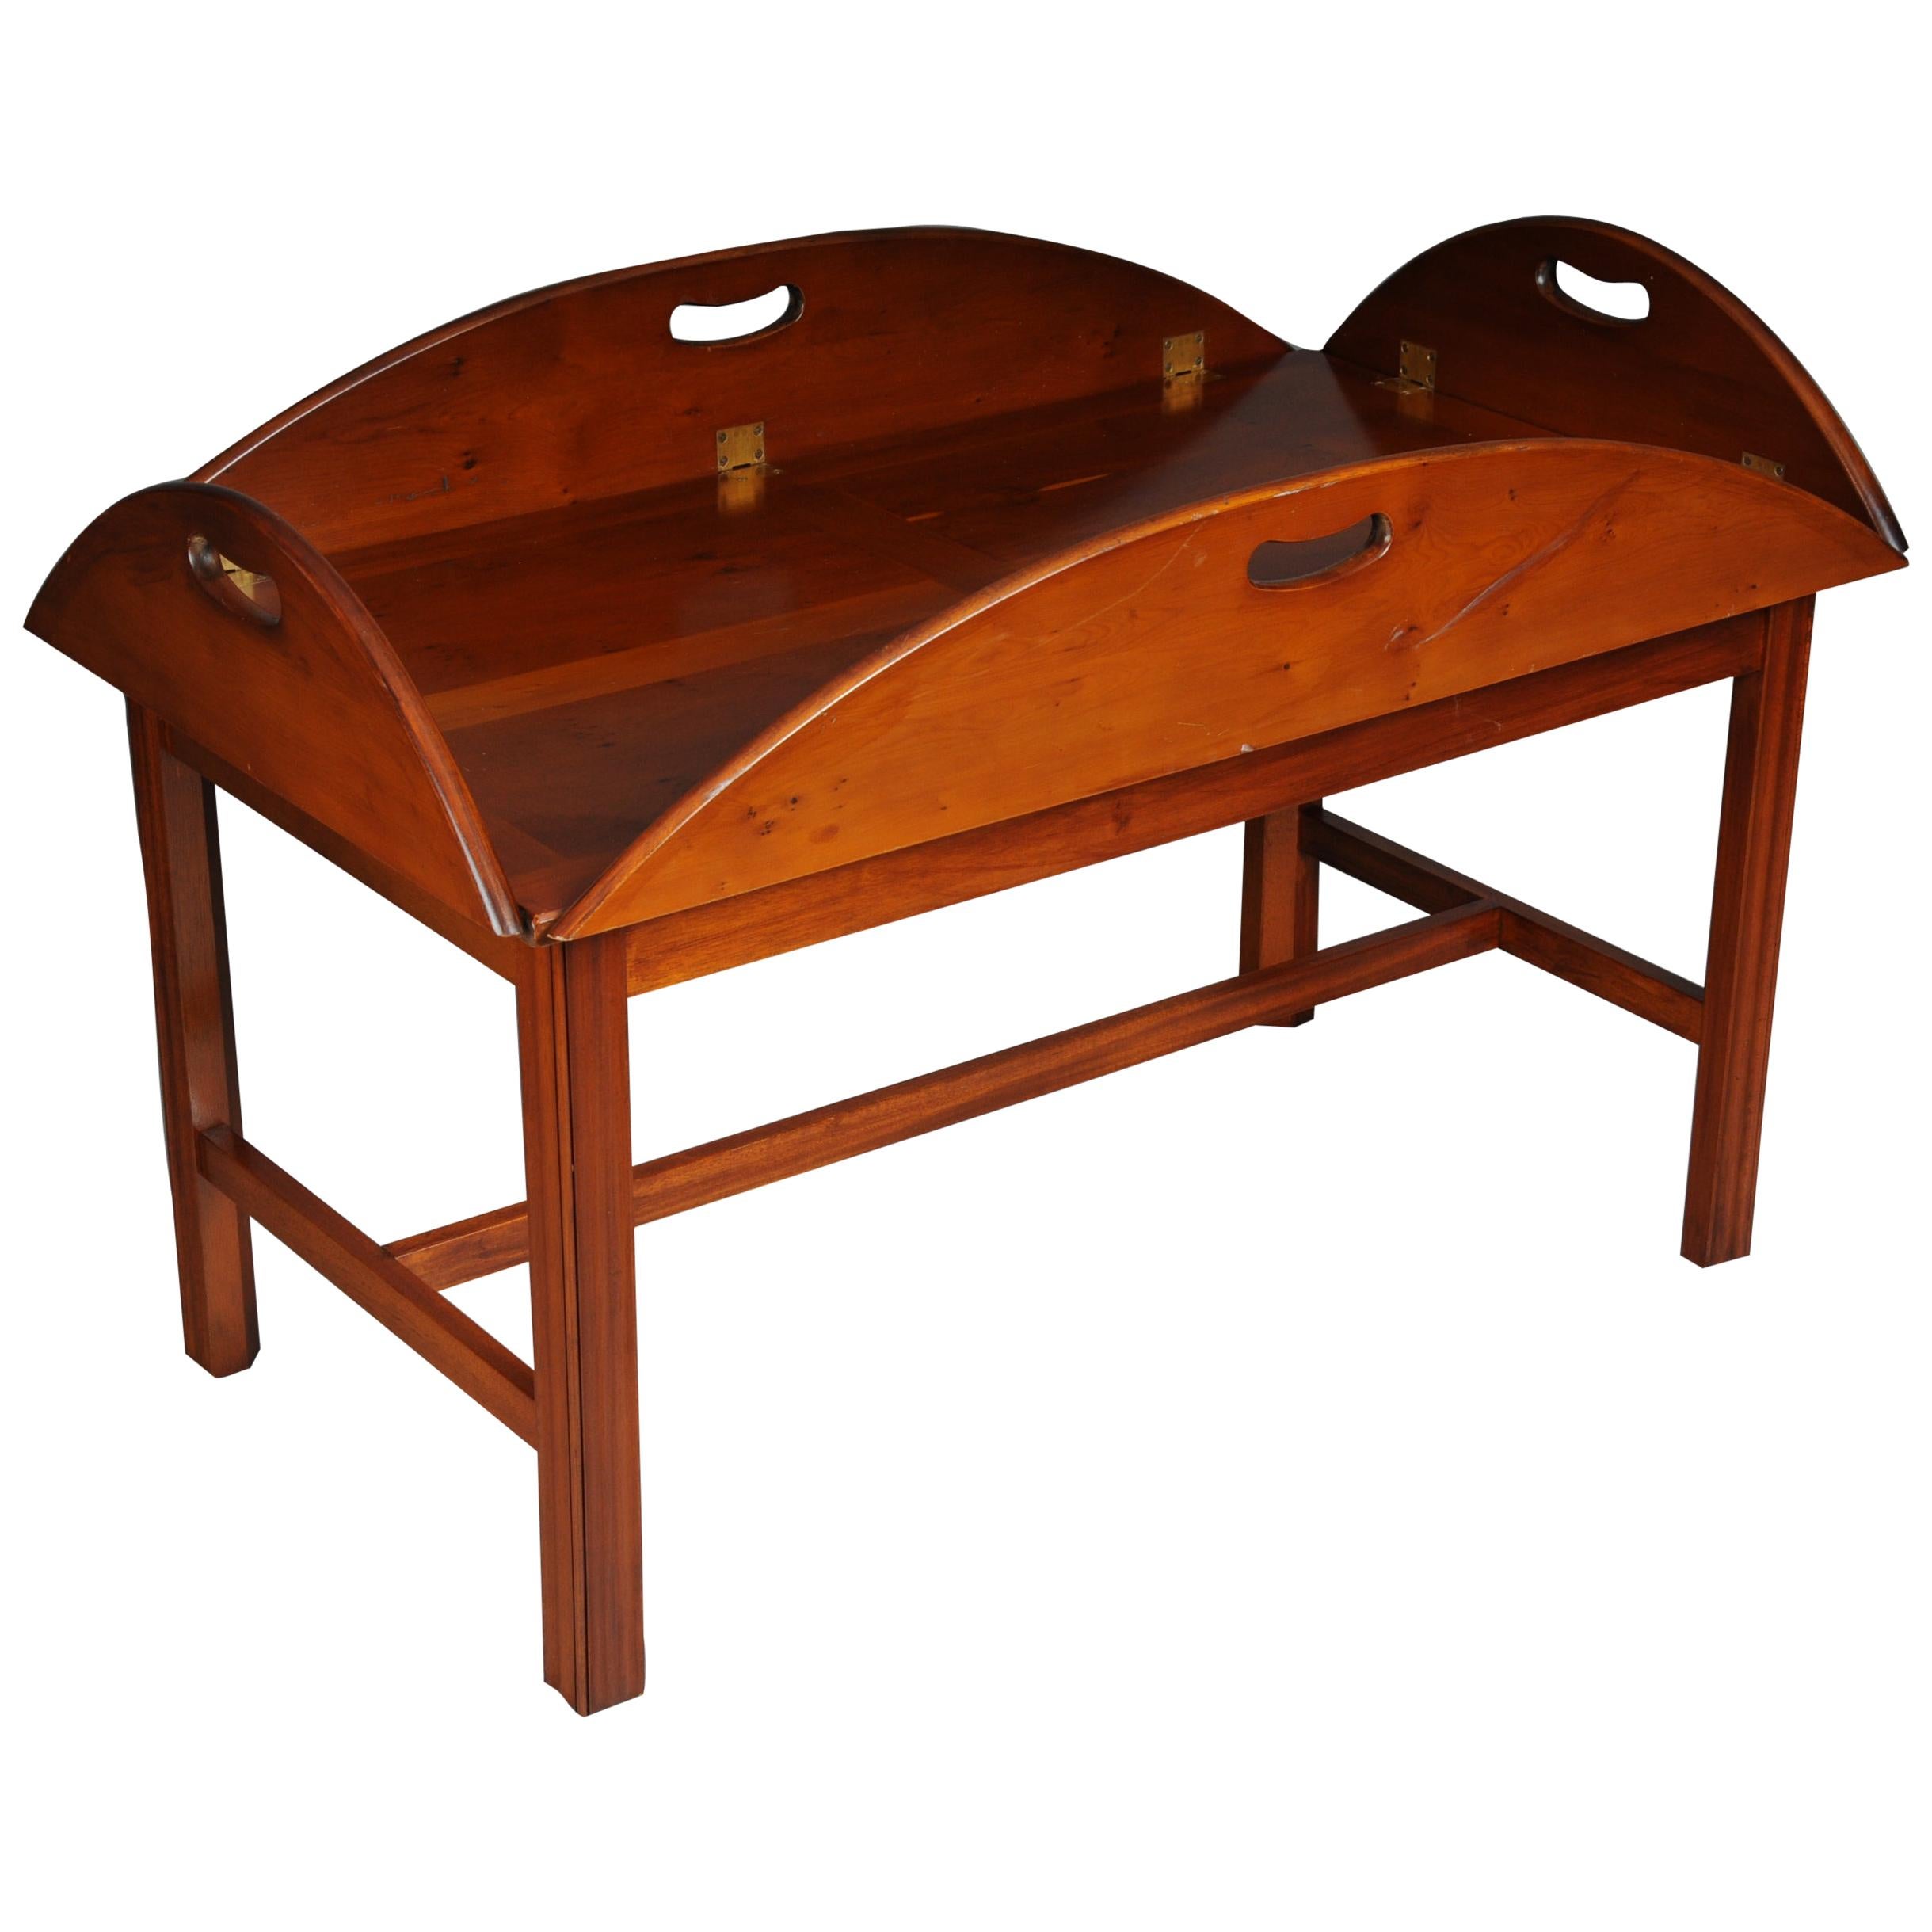 20th Century English Captain's Coffee Table / Table, Yew Tree